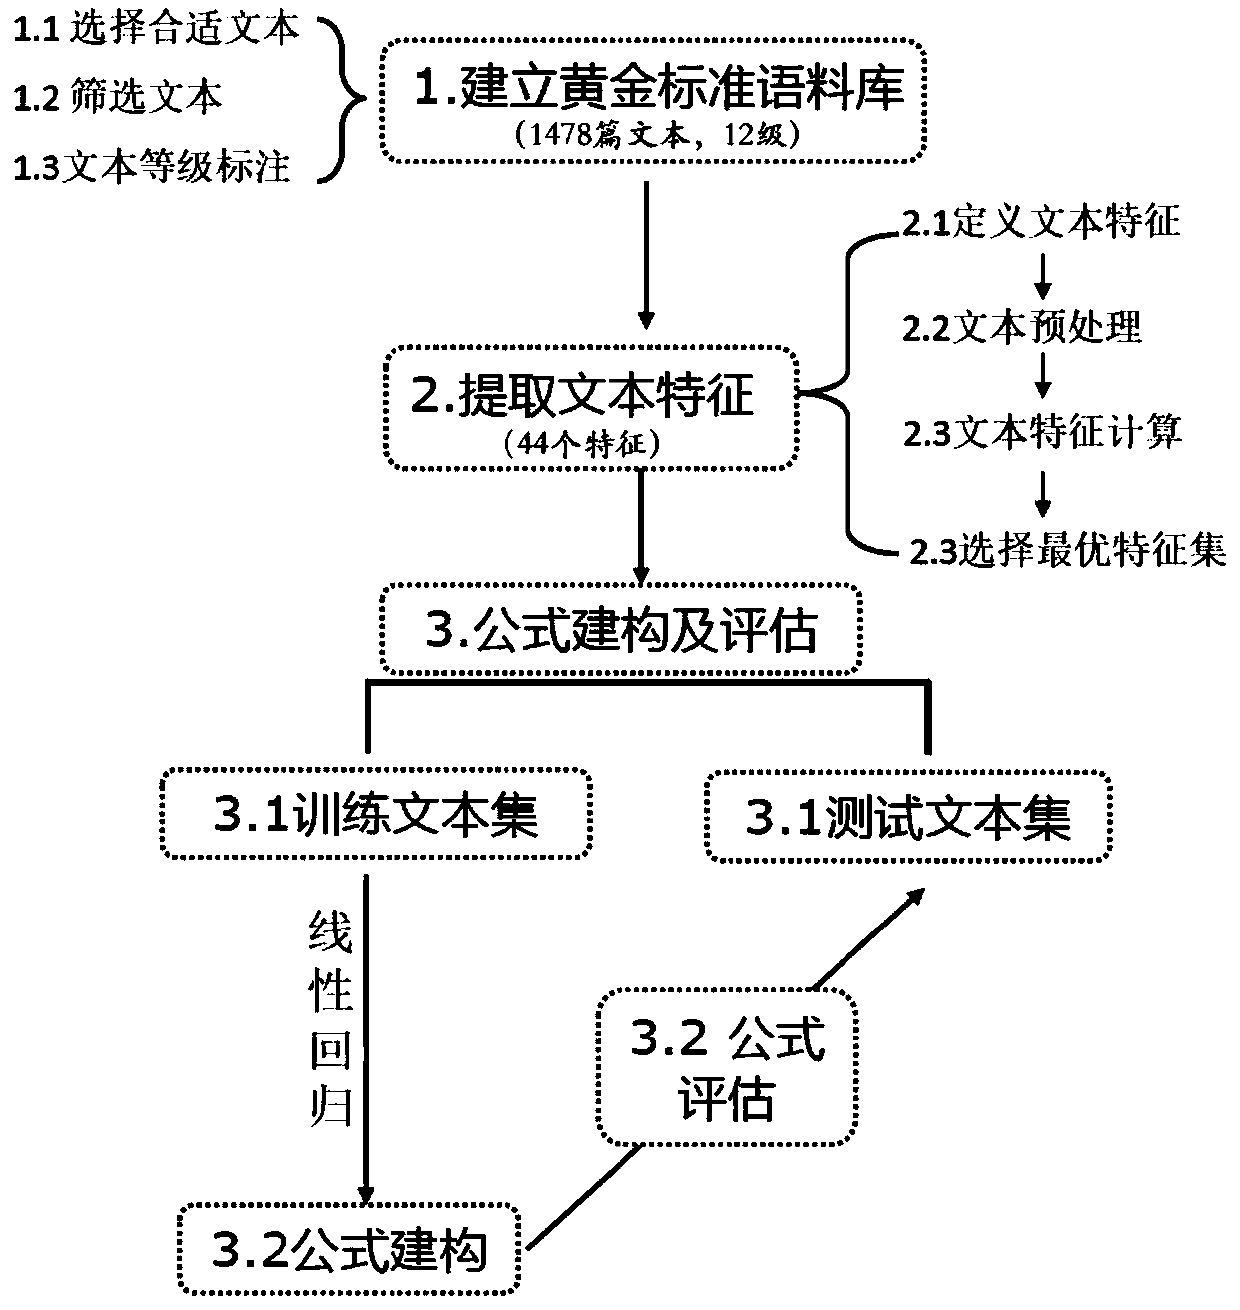 Hierarchical evaluation modeling method for readability of a simplified Chinese text